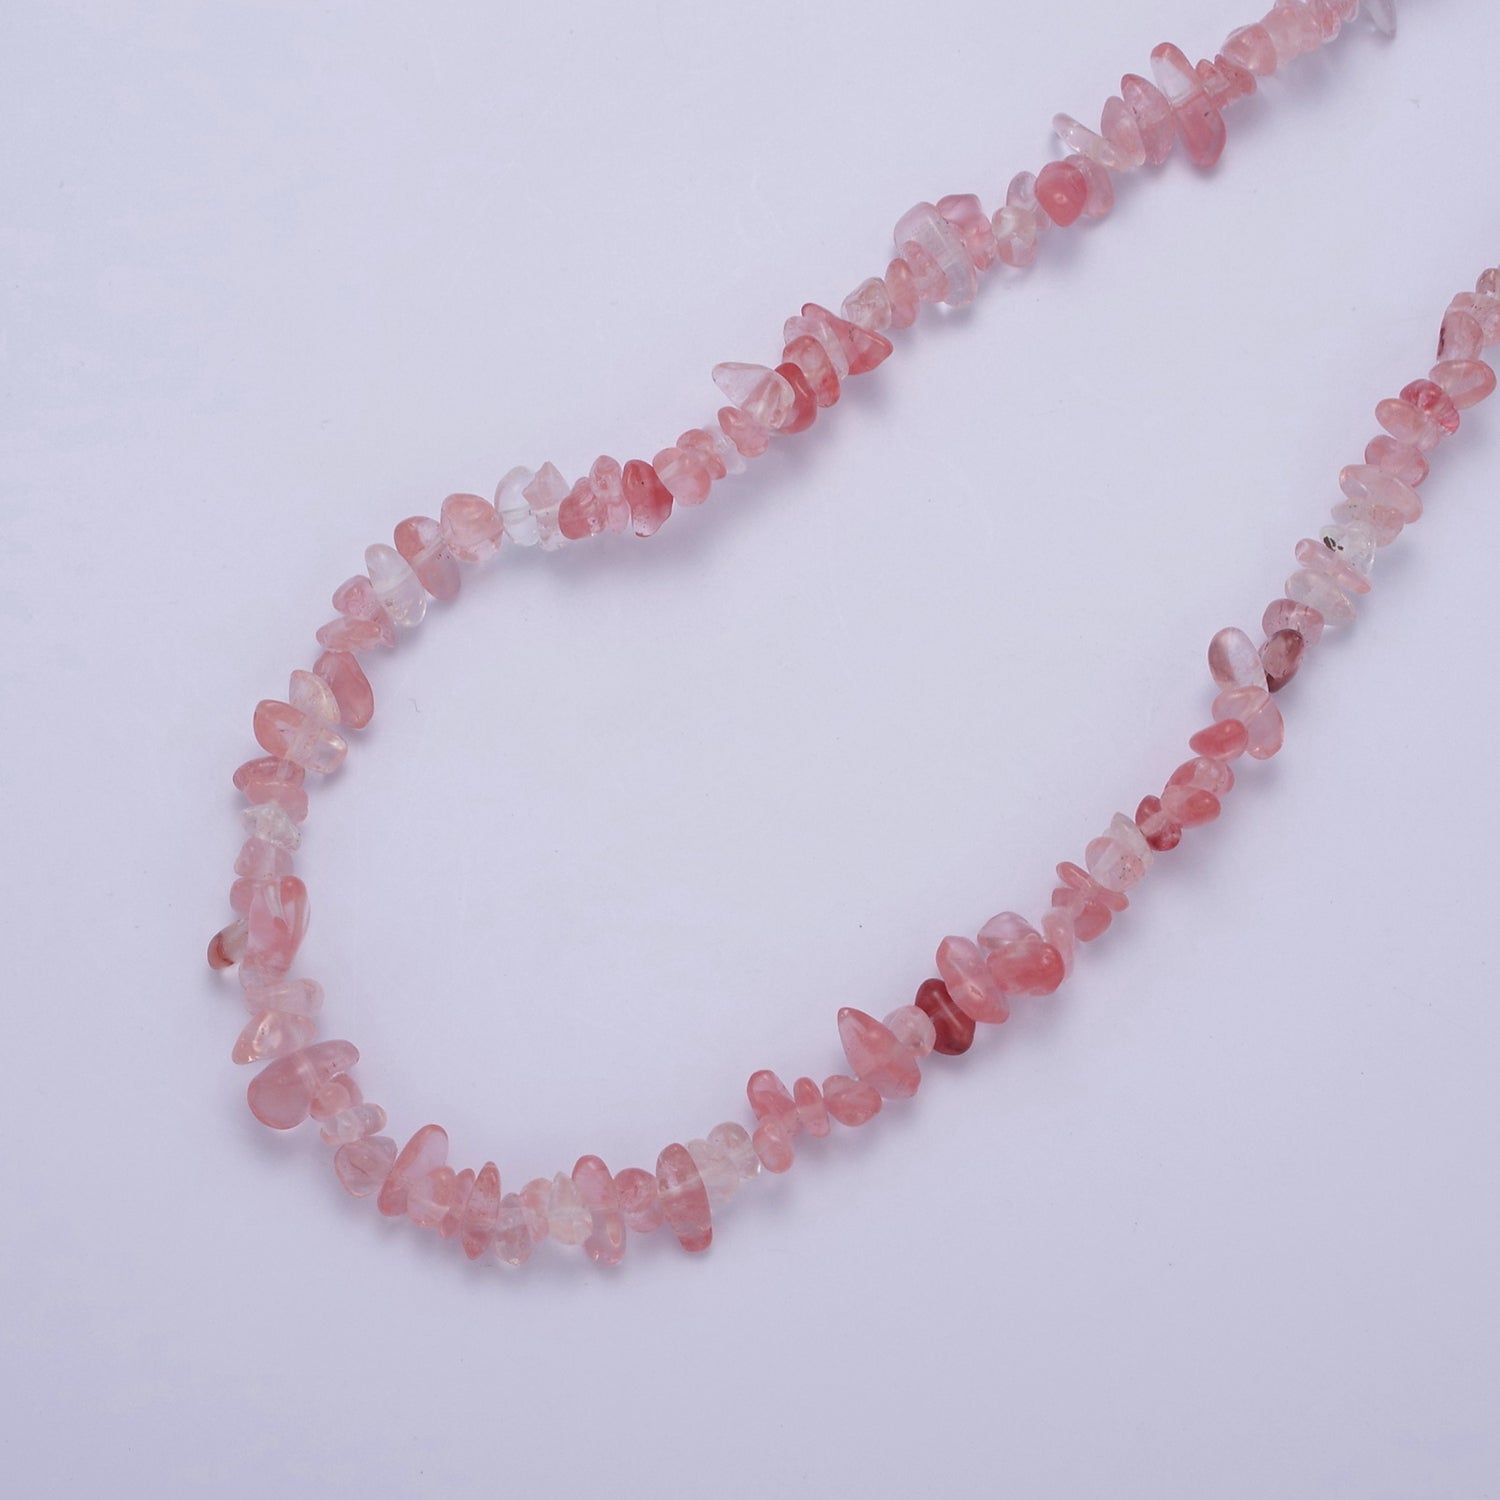 17.7 Inch Natural Watermelon Quartz Crystal Stone Bead Necklace with 2" Extender WA-634 - DLUXCA